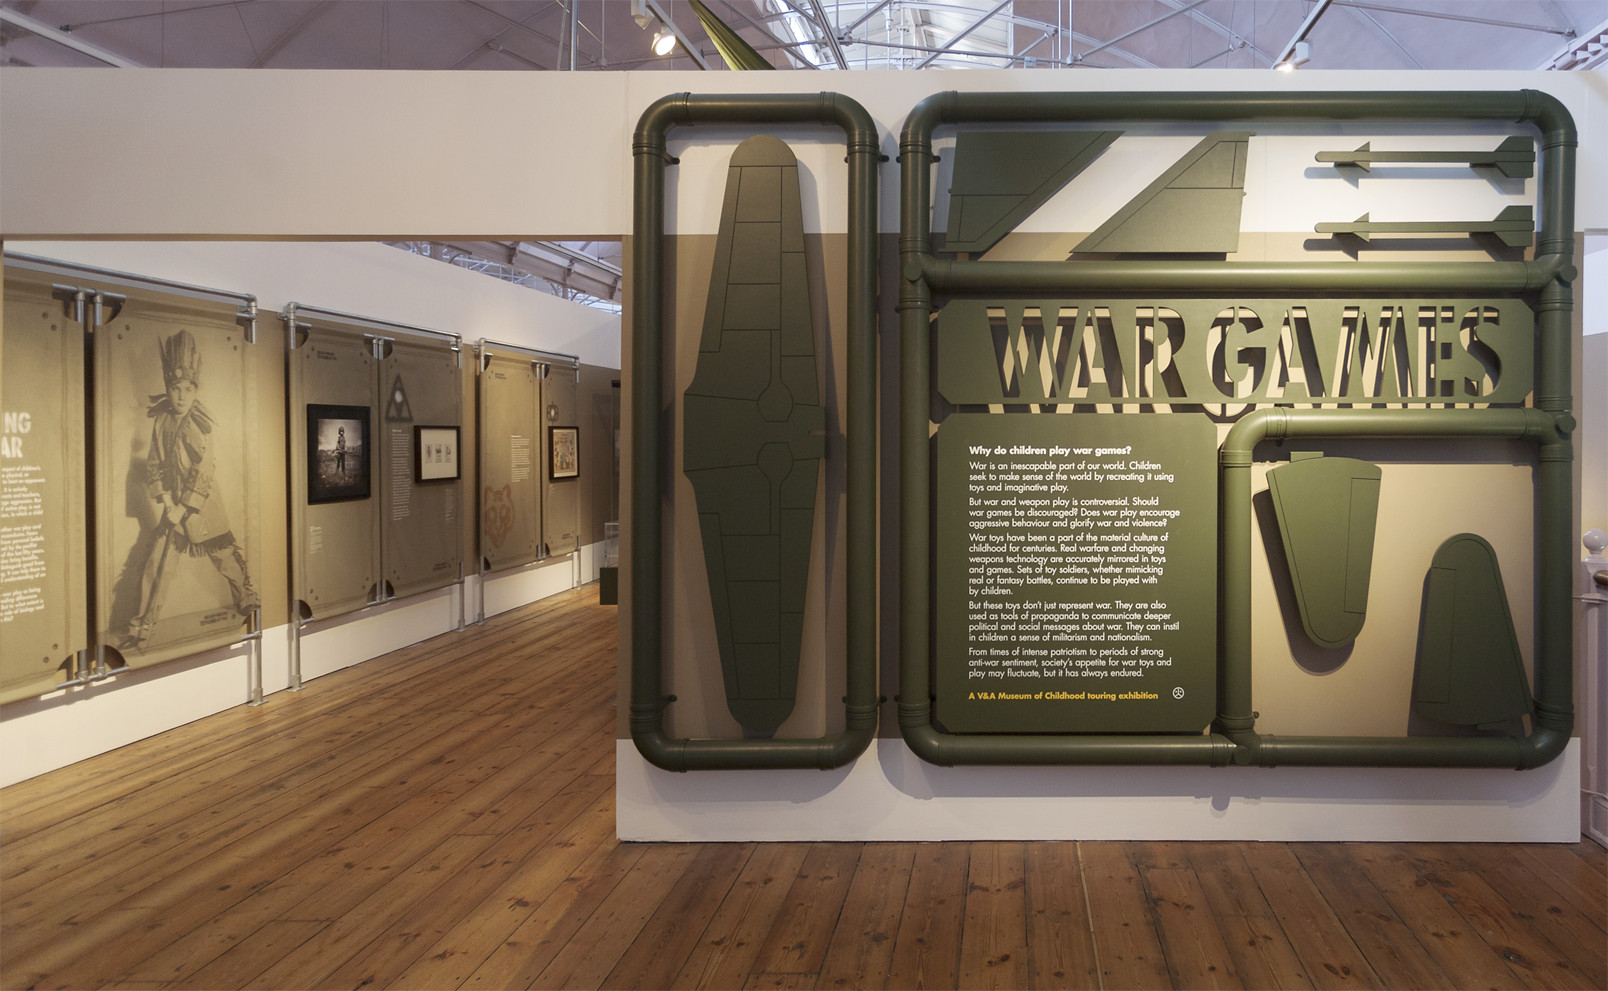 Like an oversized Airfix model kit, objects are mounted to their plastic sprues and flank the entrance marking the beginning of the exhibition.